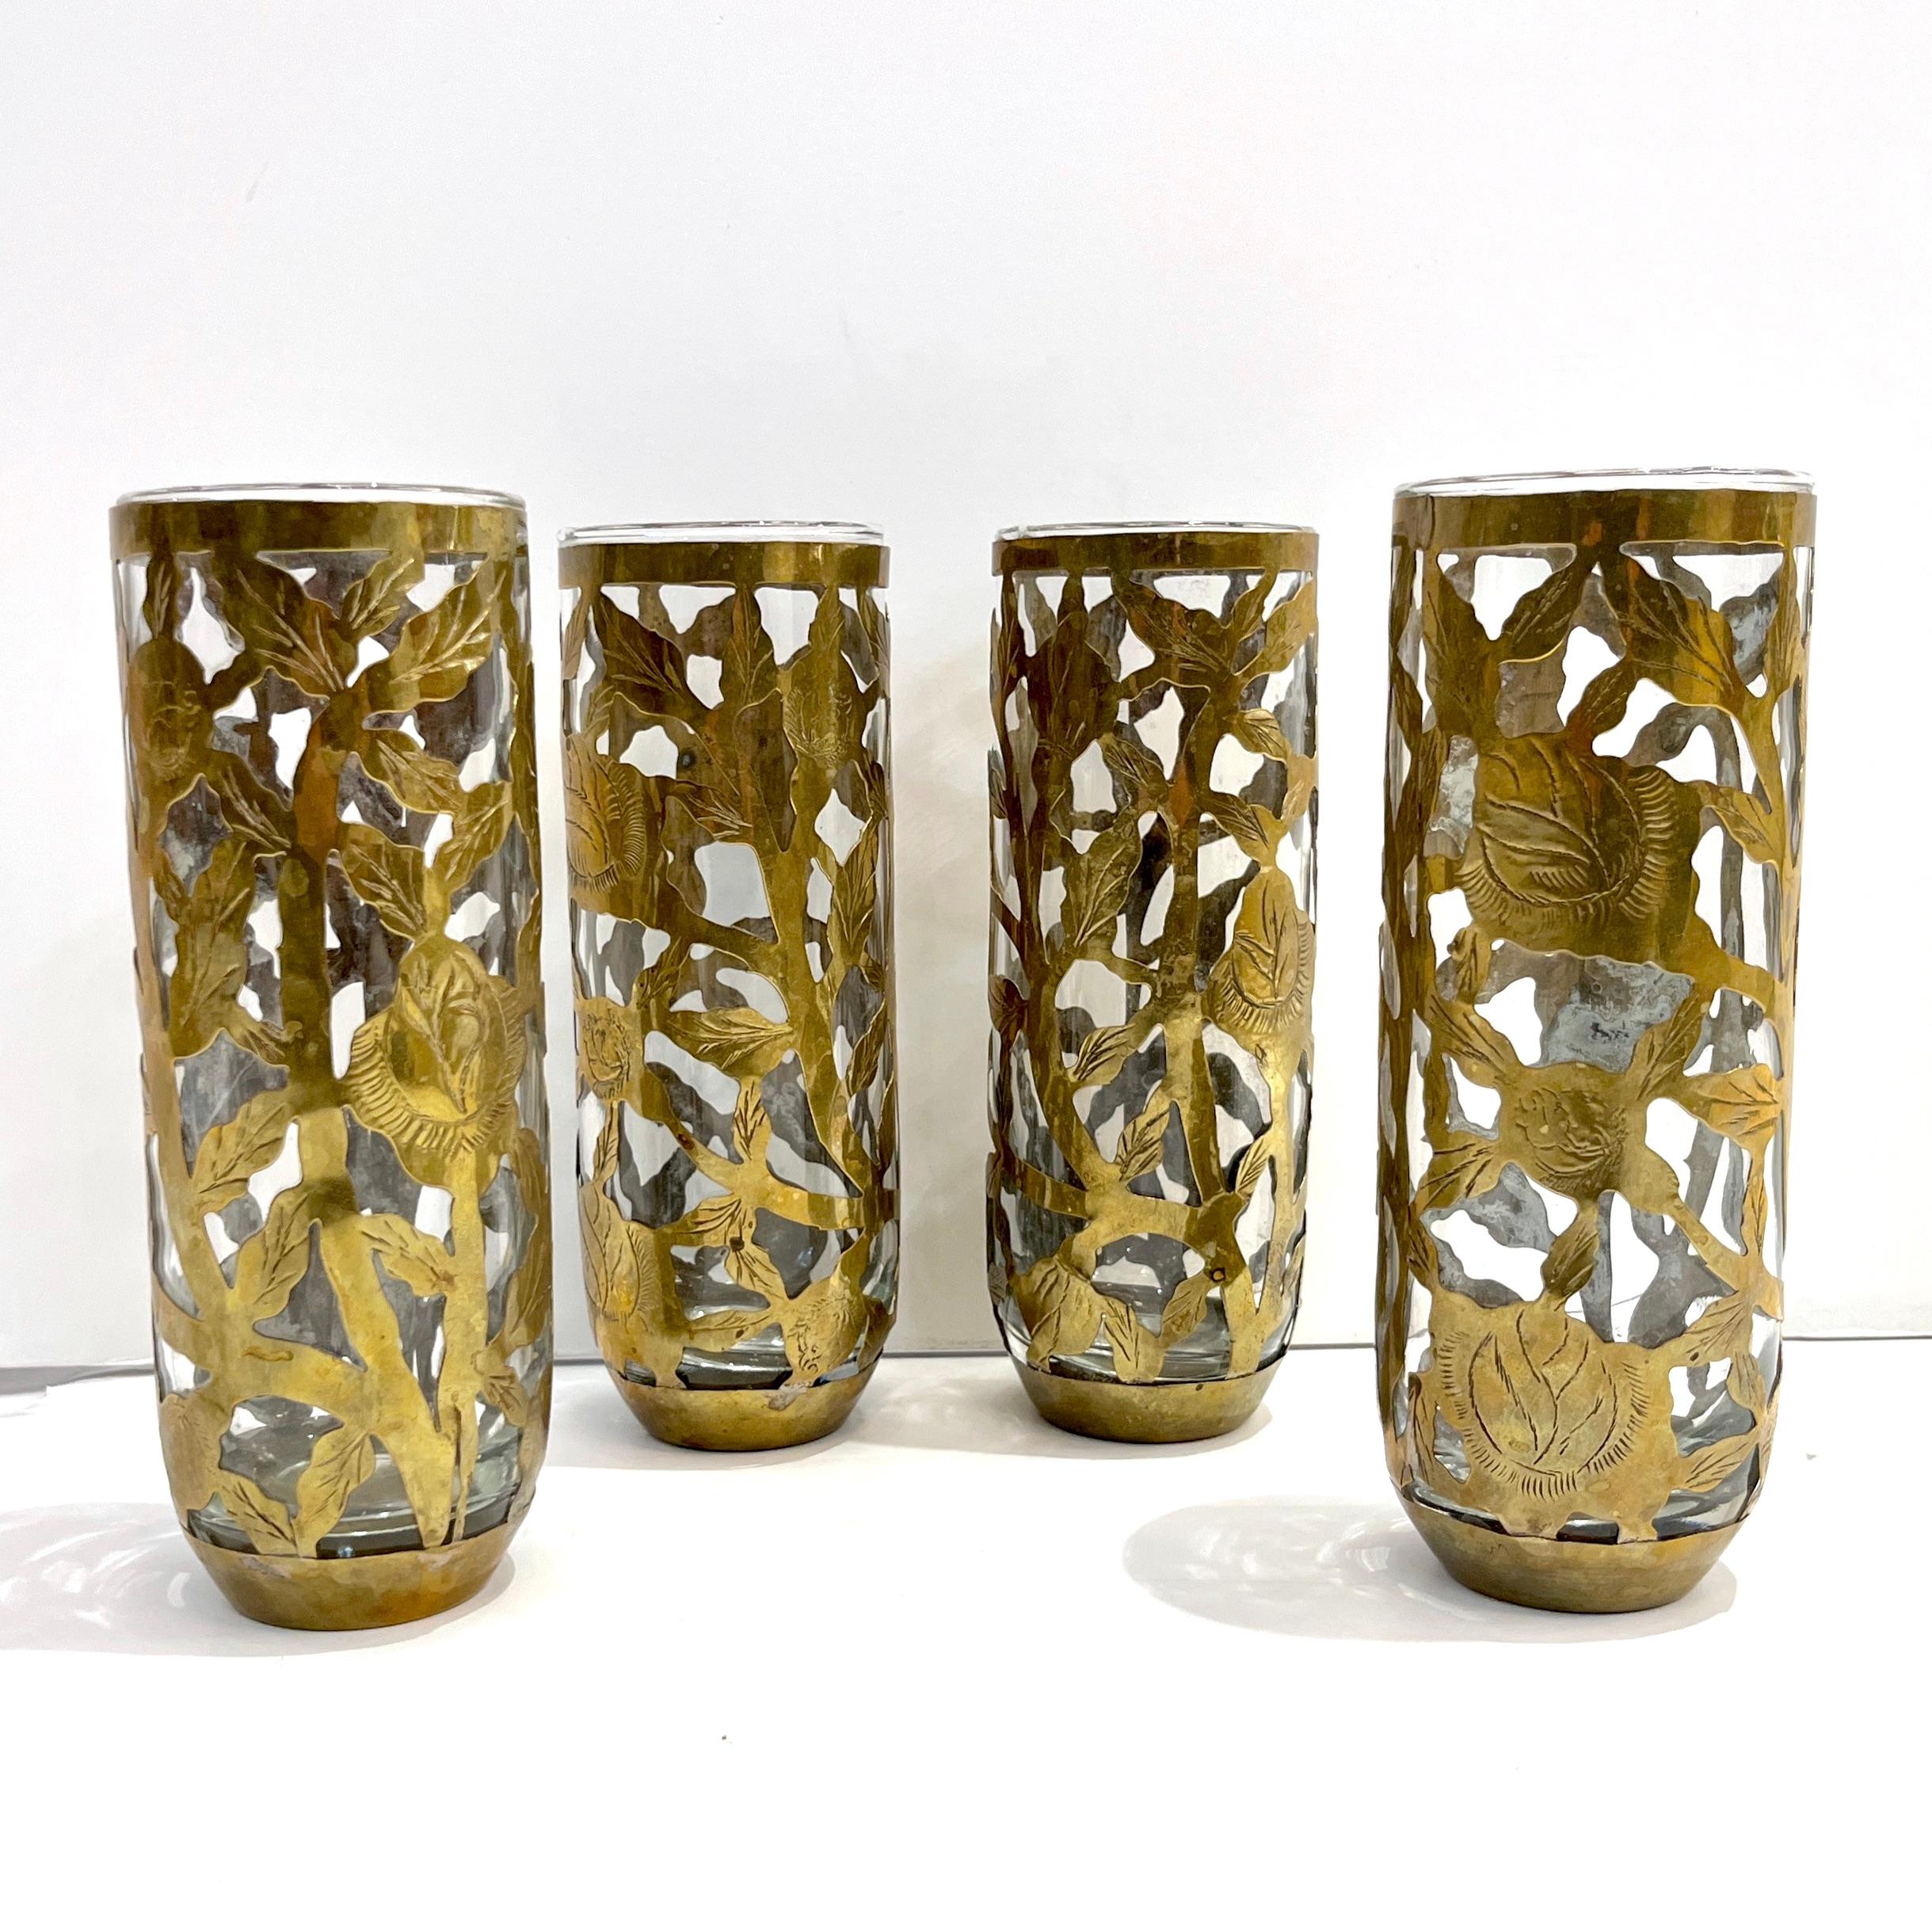 1960s mid-20th century set of 4 organic glasses, entirely handcrafted in Mexico, overlayed in a handmade antique brass open sheath, ornate with an etched cutwork floral and foliage decor.
Ideal as barware but also as individual vases for floral